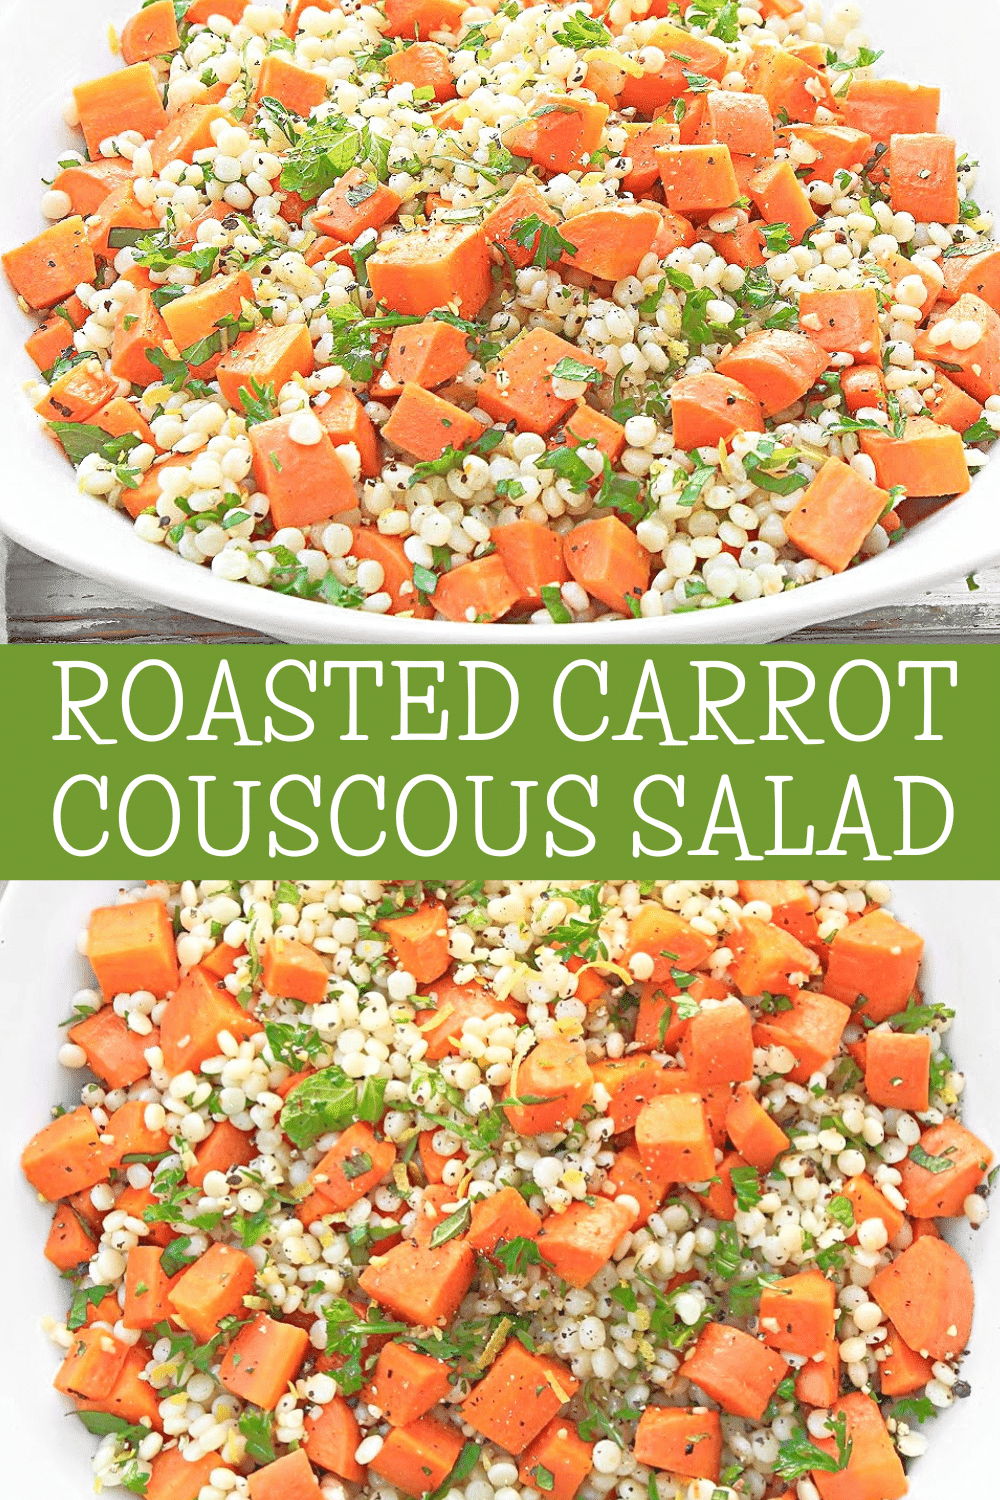 Roasted Carrot Couscous Salad ~ Roasted carrots with pearl couscous and zesty gremolata made with fresh mint, parsley, lemon, and garlic. via @thiswifecooks